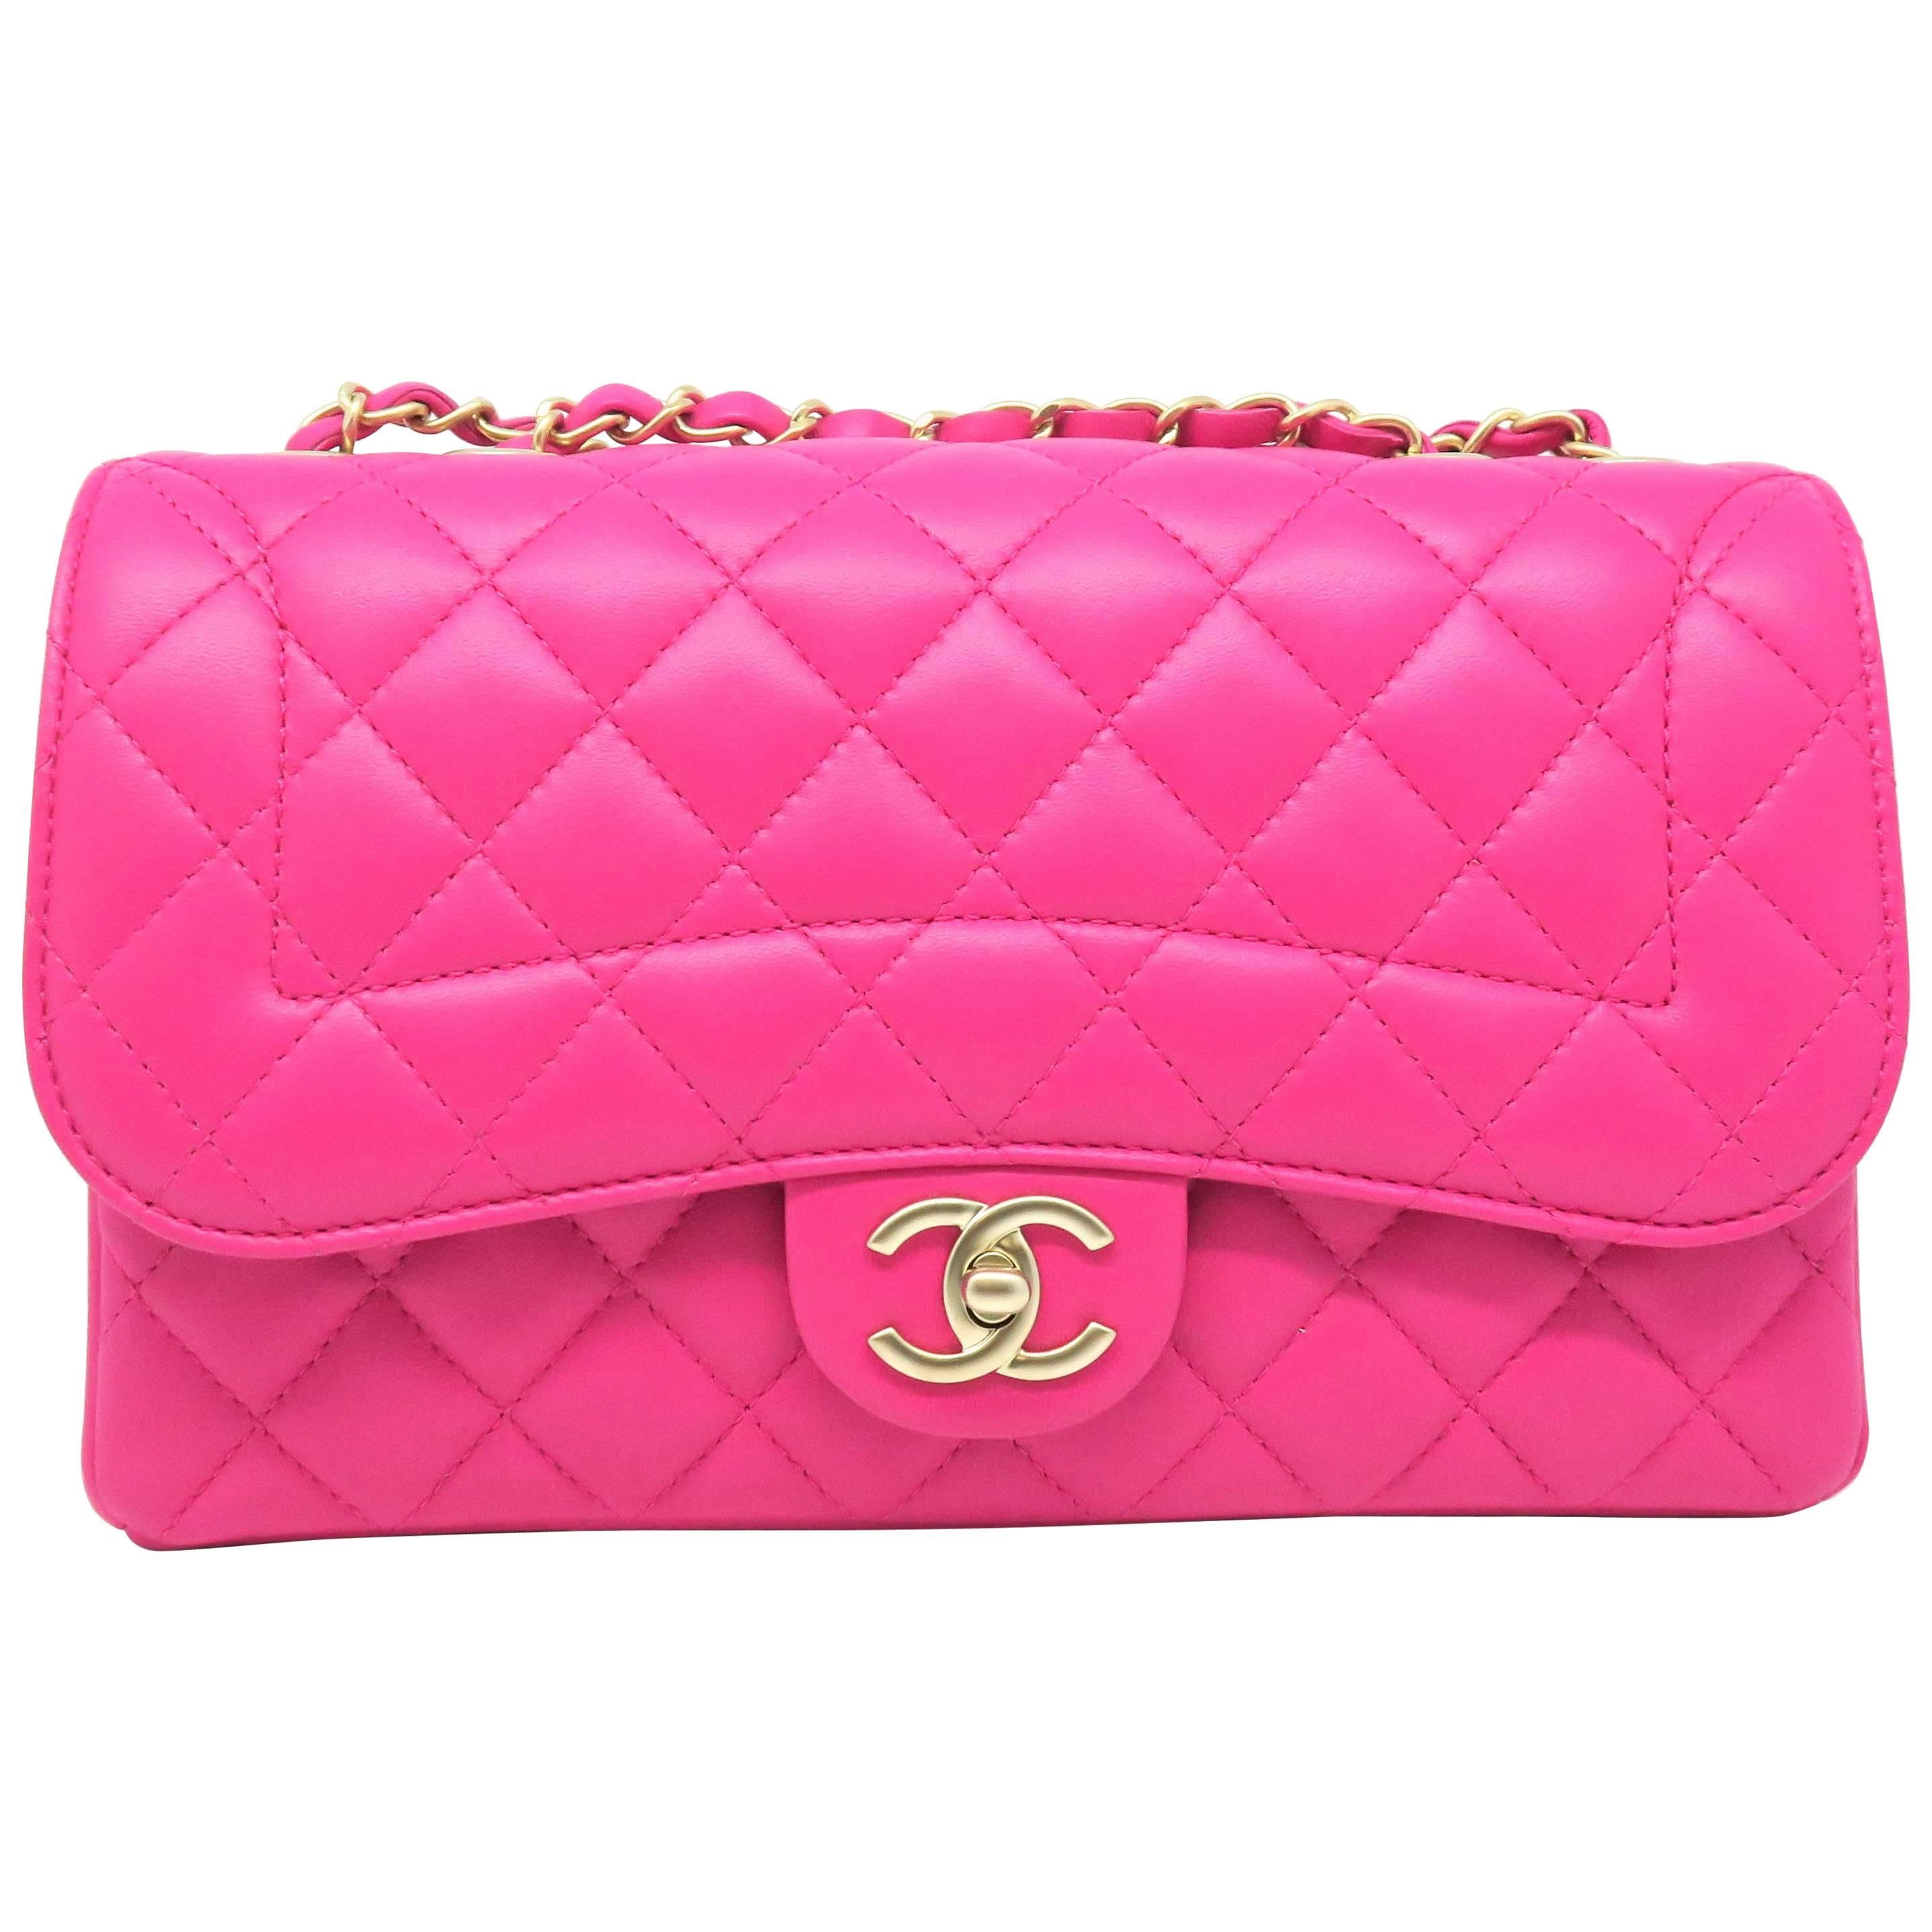 Chanel Fuchsia Quilted Lambskin Leather Gold Metal Chain Shoulder Flap Bag